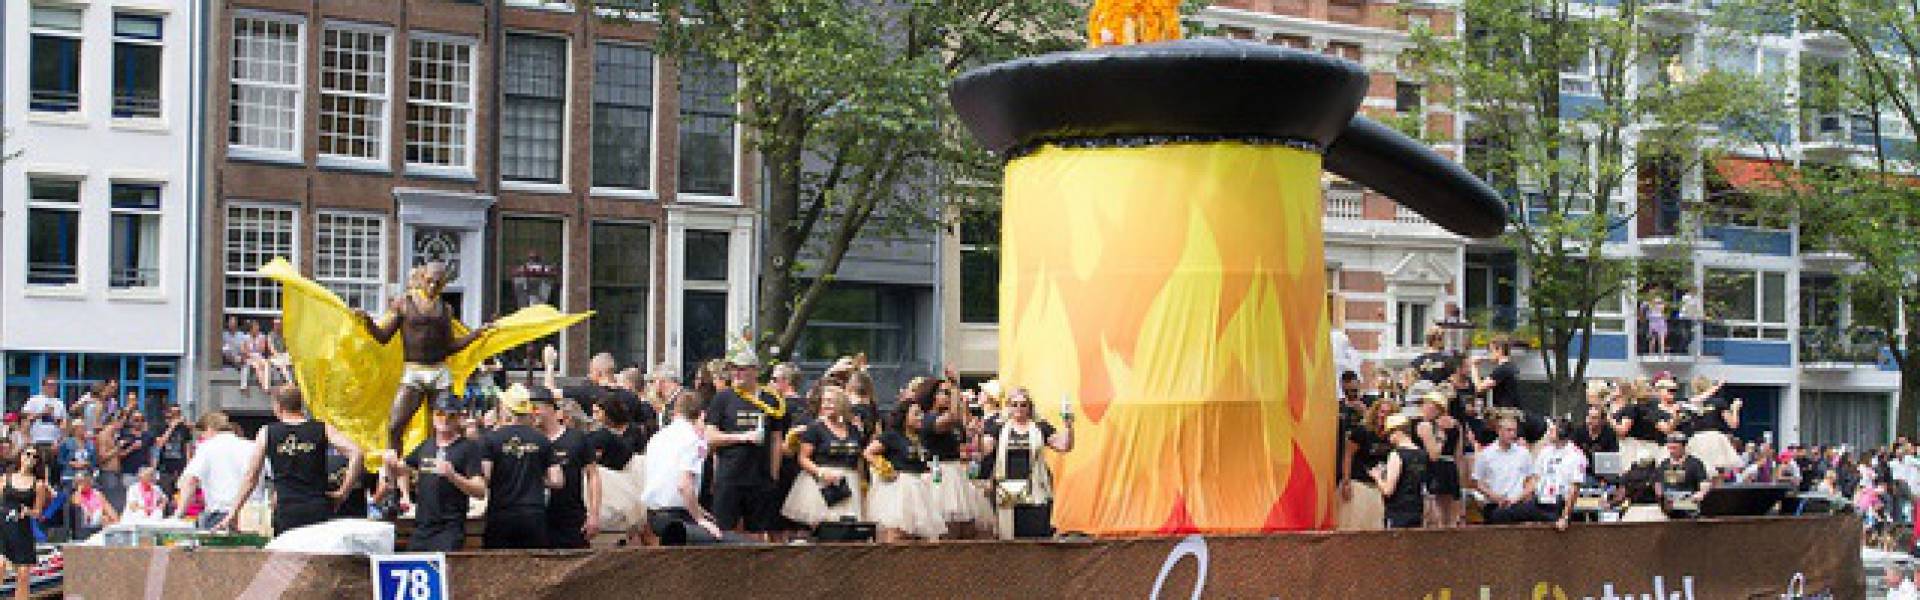 Large inflatable promotional material | X-Treme Creations Boat sailing on the canal during the Amsterdam Gay Pride with on top of it a gigantic inflatable frying pan of 4m diameter that moves up and down with exotic dancers Loetje Steakhouse X-Treme Creations